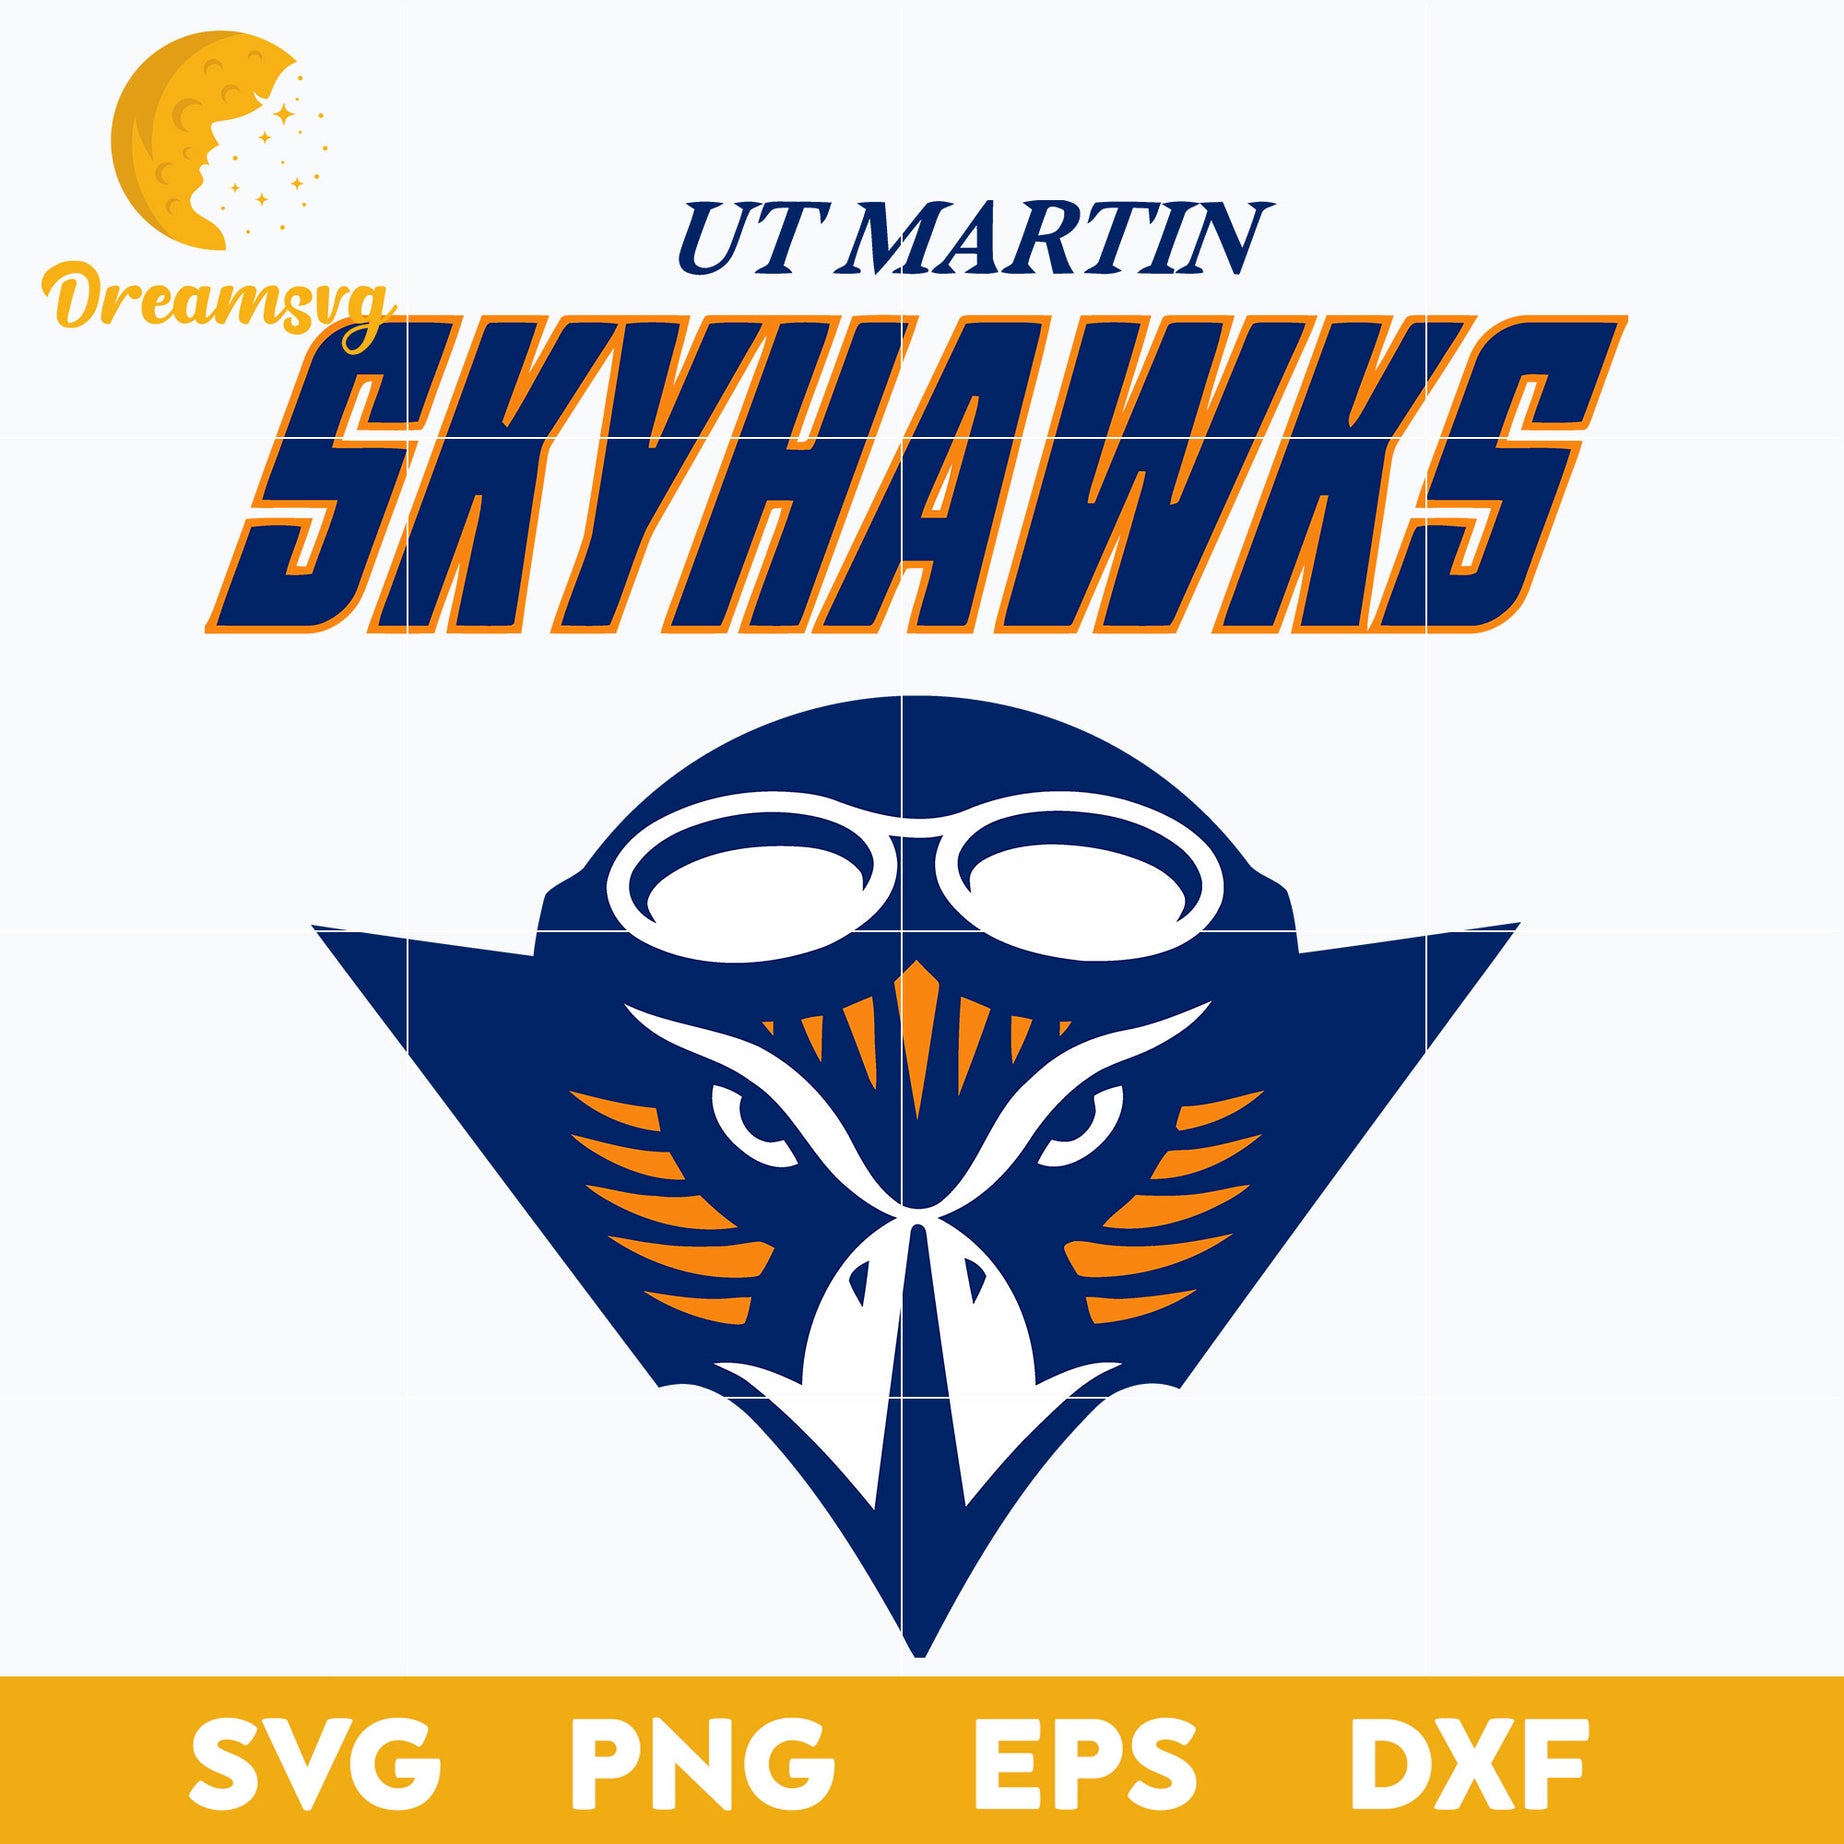 Tennessee Martin Skyhawks Svg, Logo Ncaa Sport Svg, Ncaa Svg, Png, Dxf, Eps Download File.